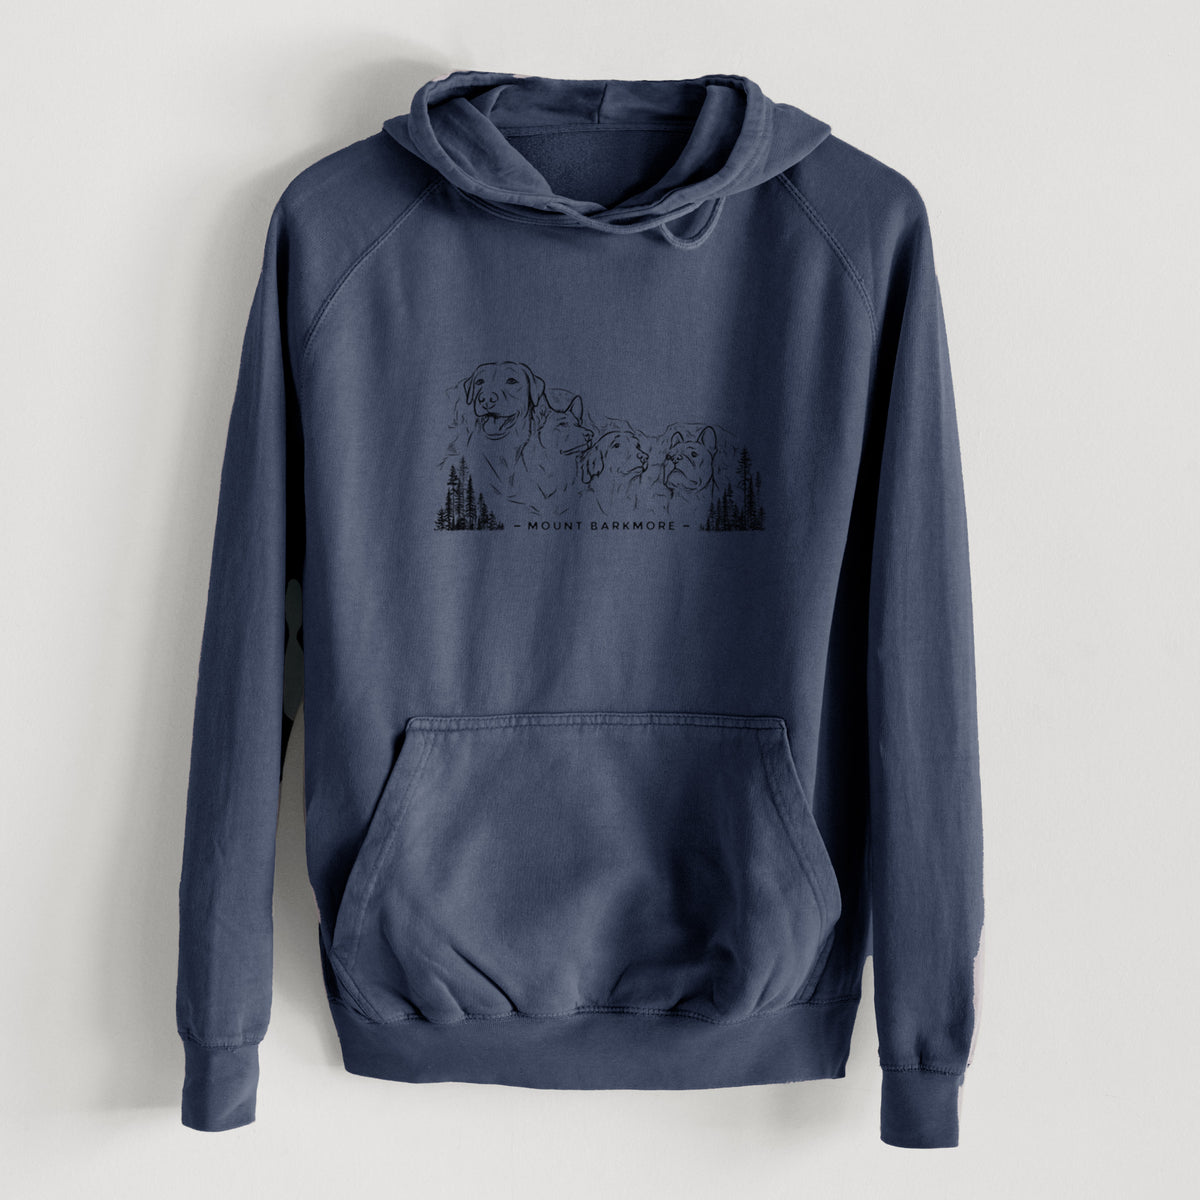 Mount Barkmore - Dog Tribute  - Mid-Weight Unisex Vintage 100% Cotton Hoodie